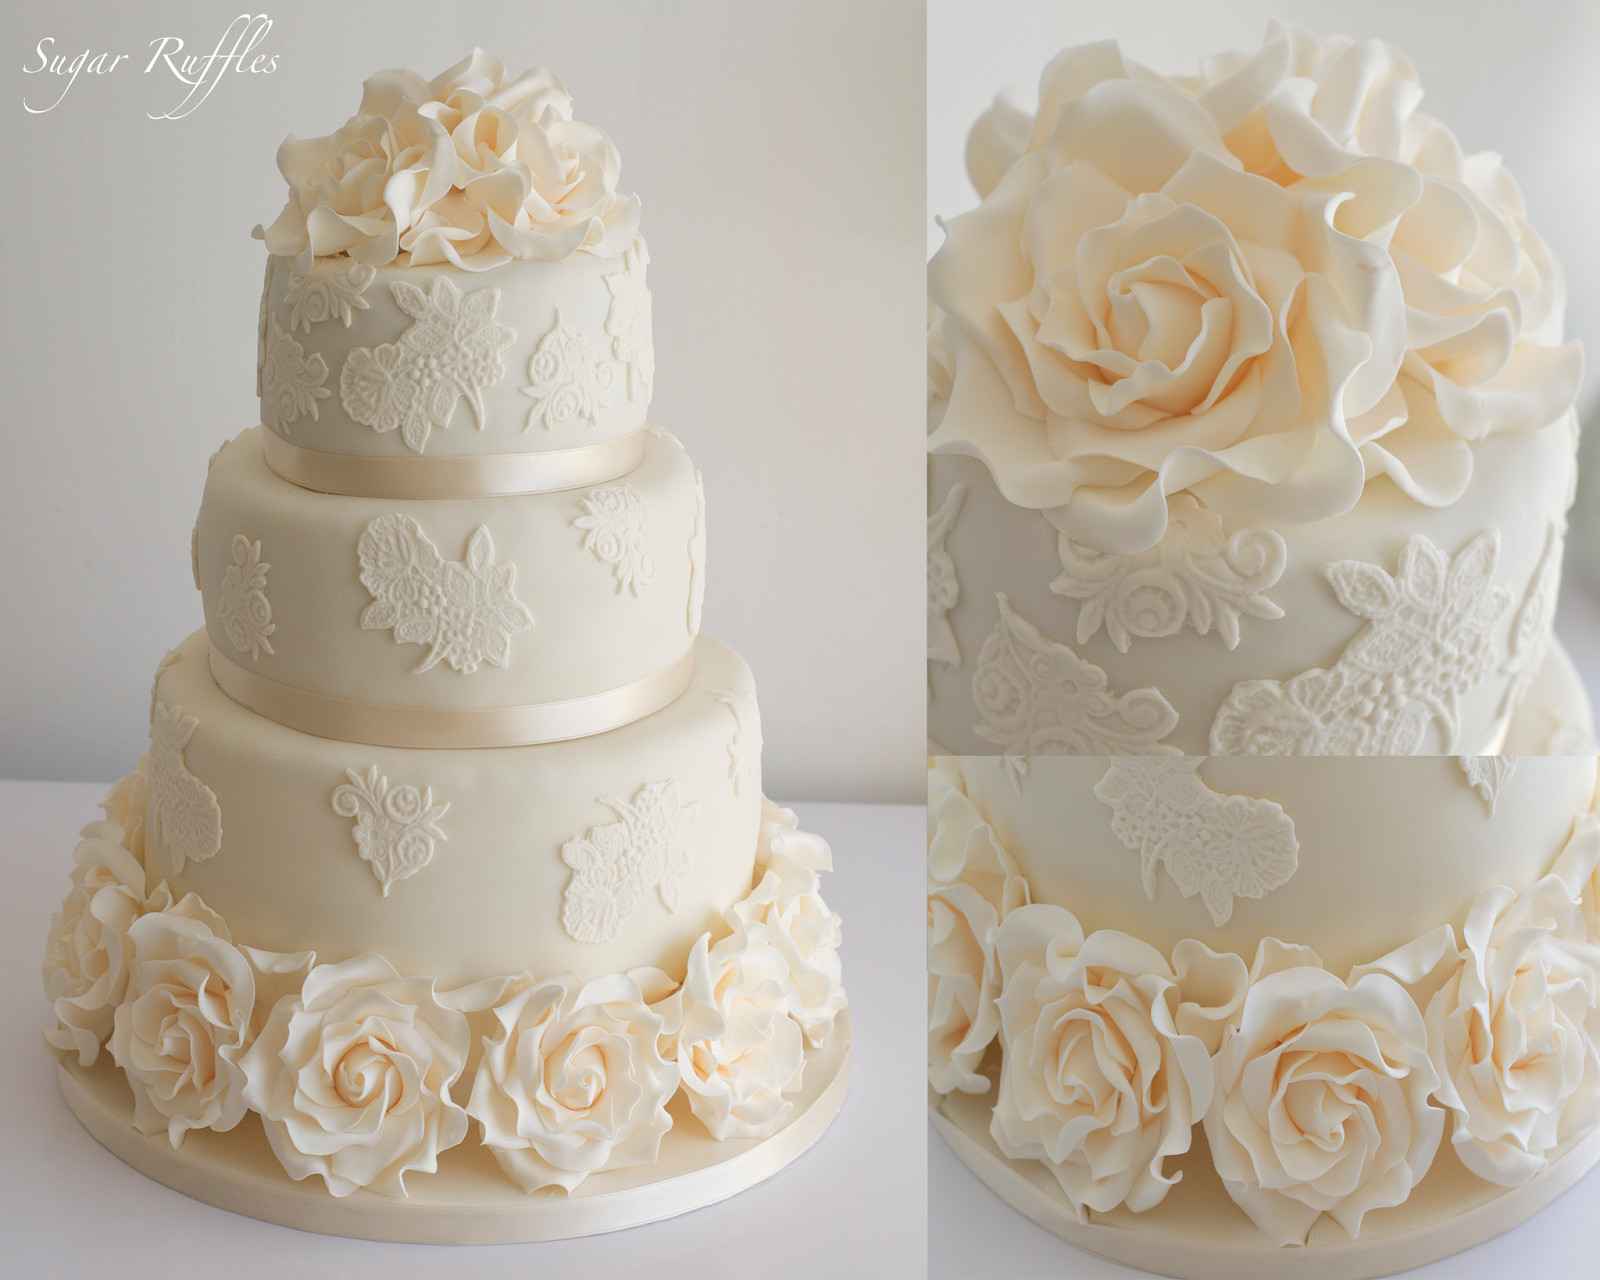 Ivory Wedding Cakes
 Wedding Cakes with lace and roses